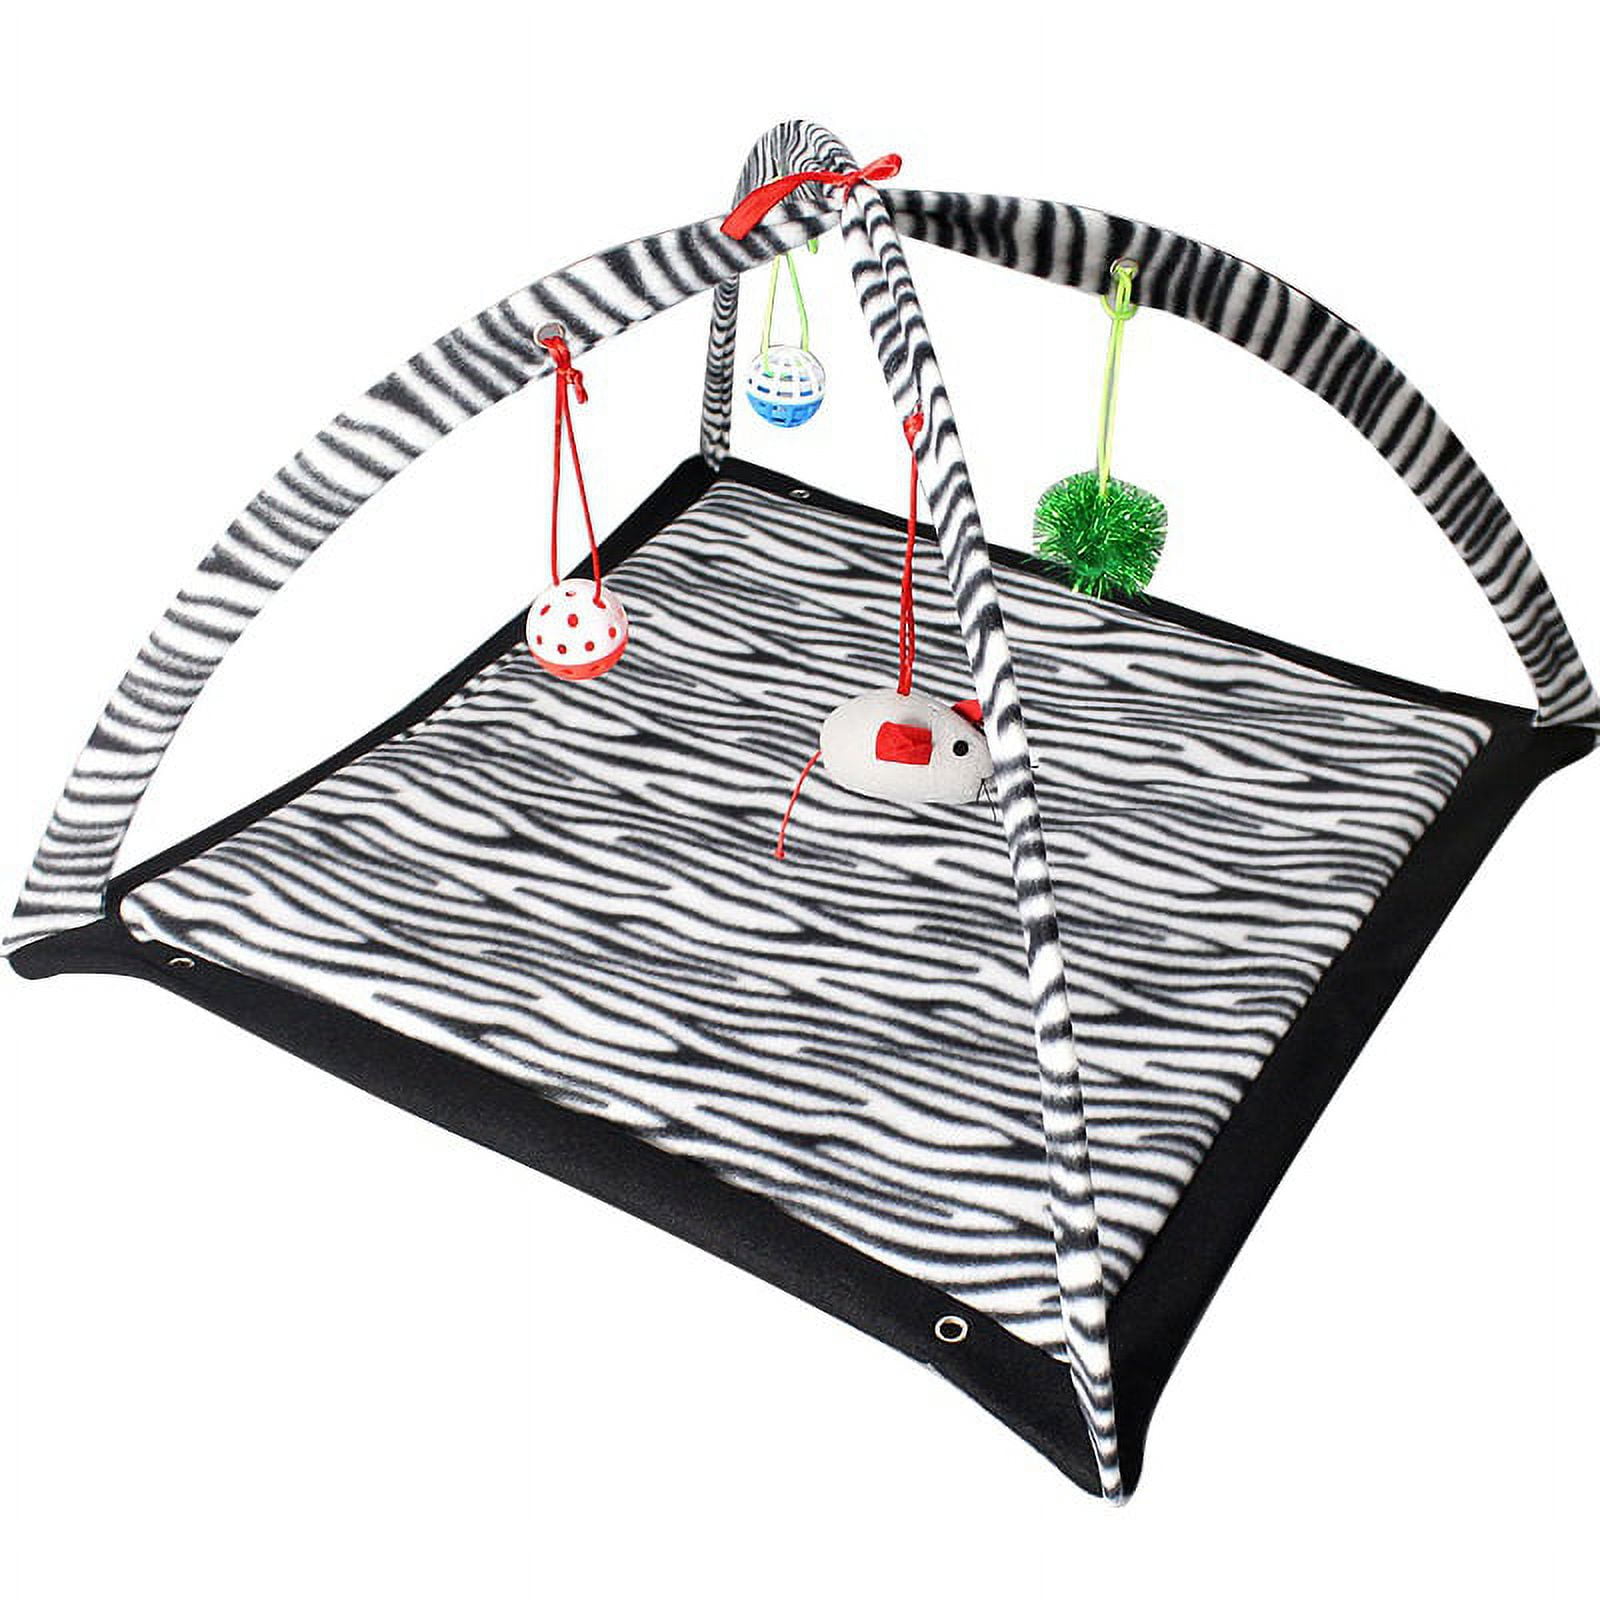 Cat Play Mat With Hanging Toys Activity Center For Bored Cats – Cute Cats  Store